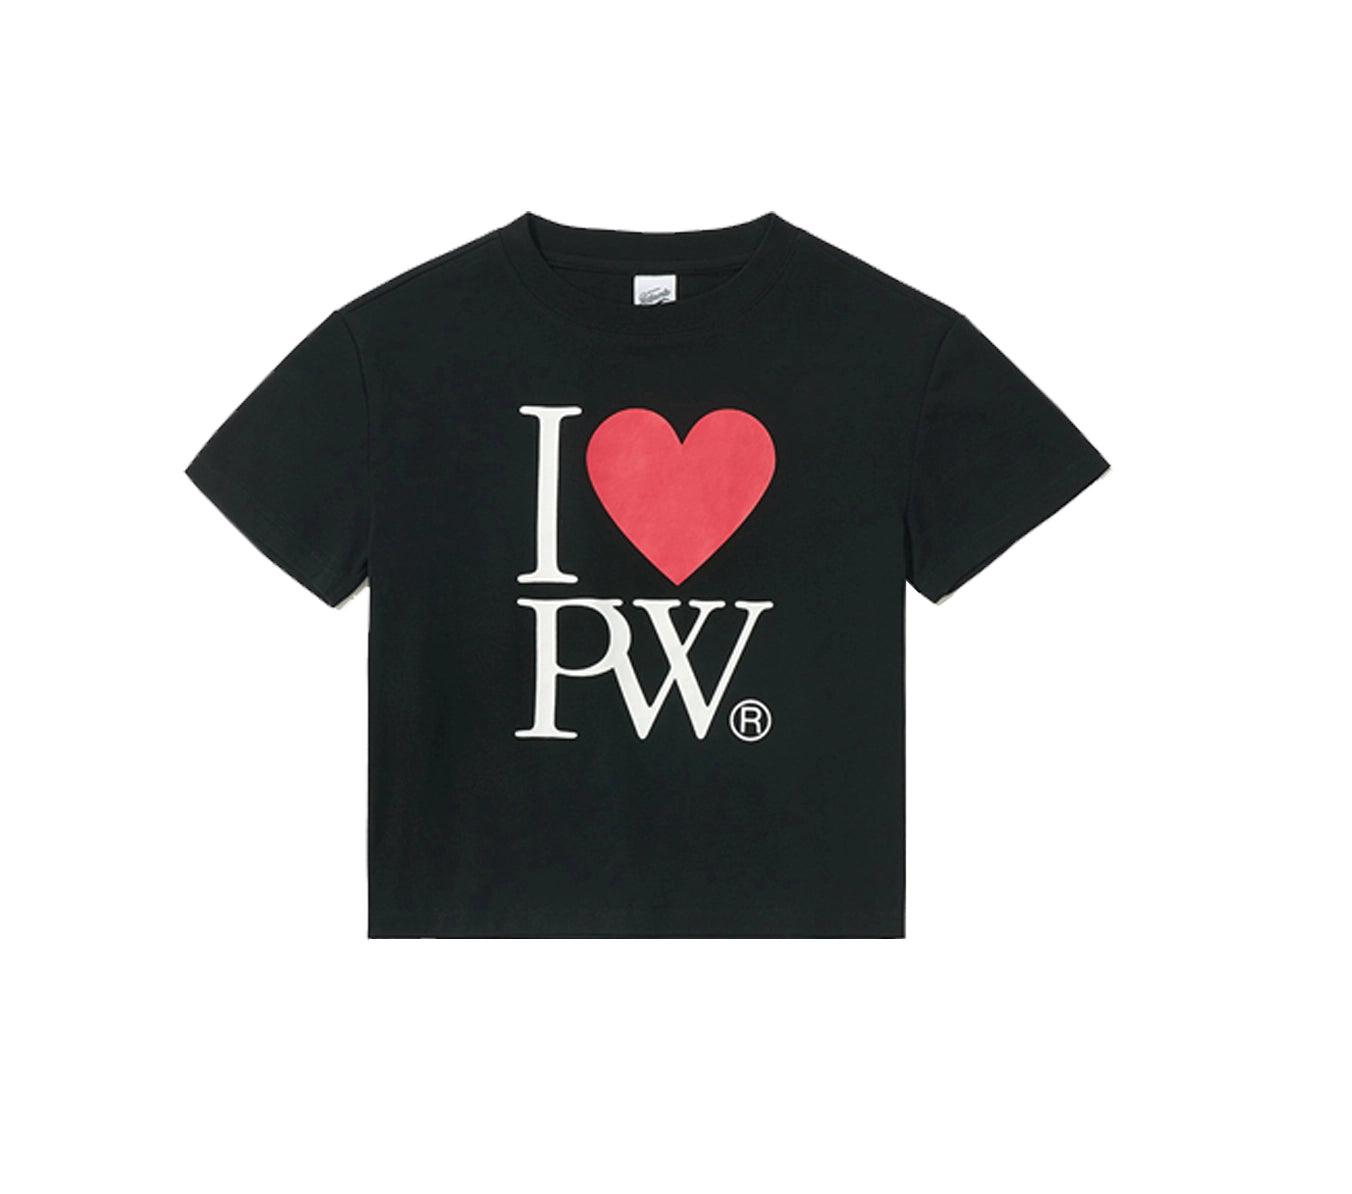 Partimento I Love PW SS T-shirt - Black - One size -